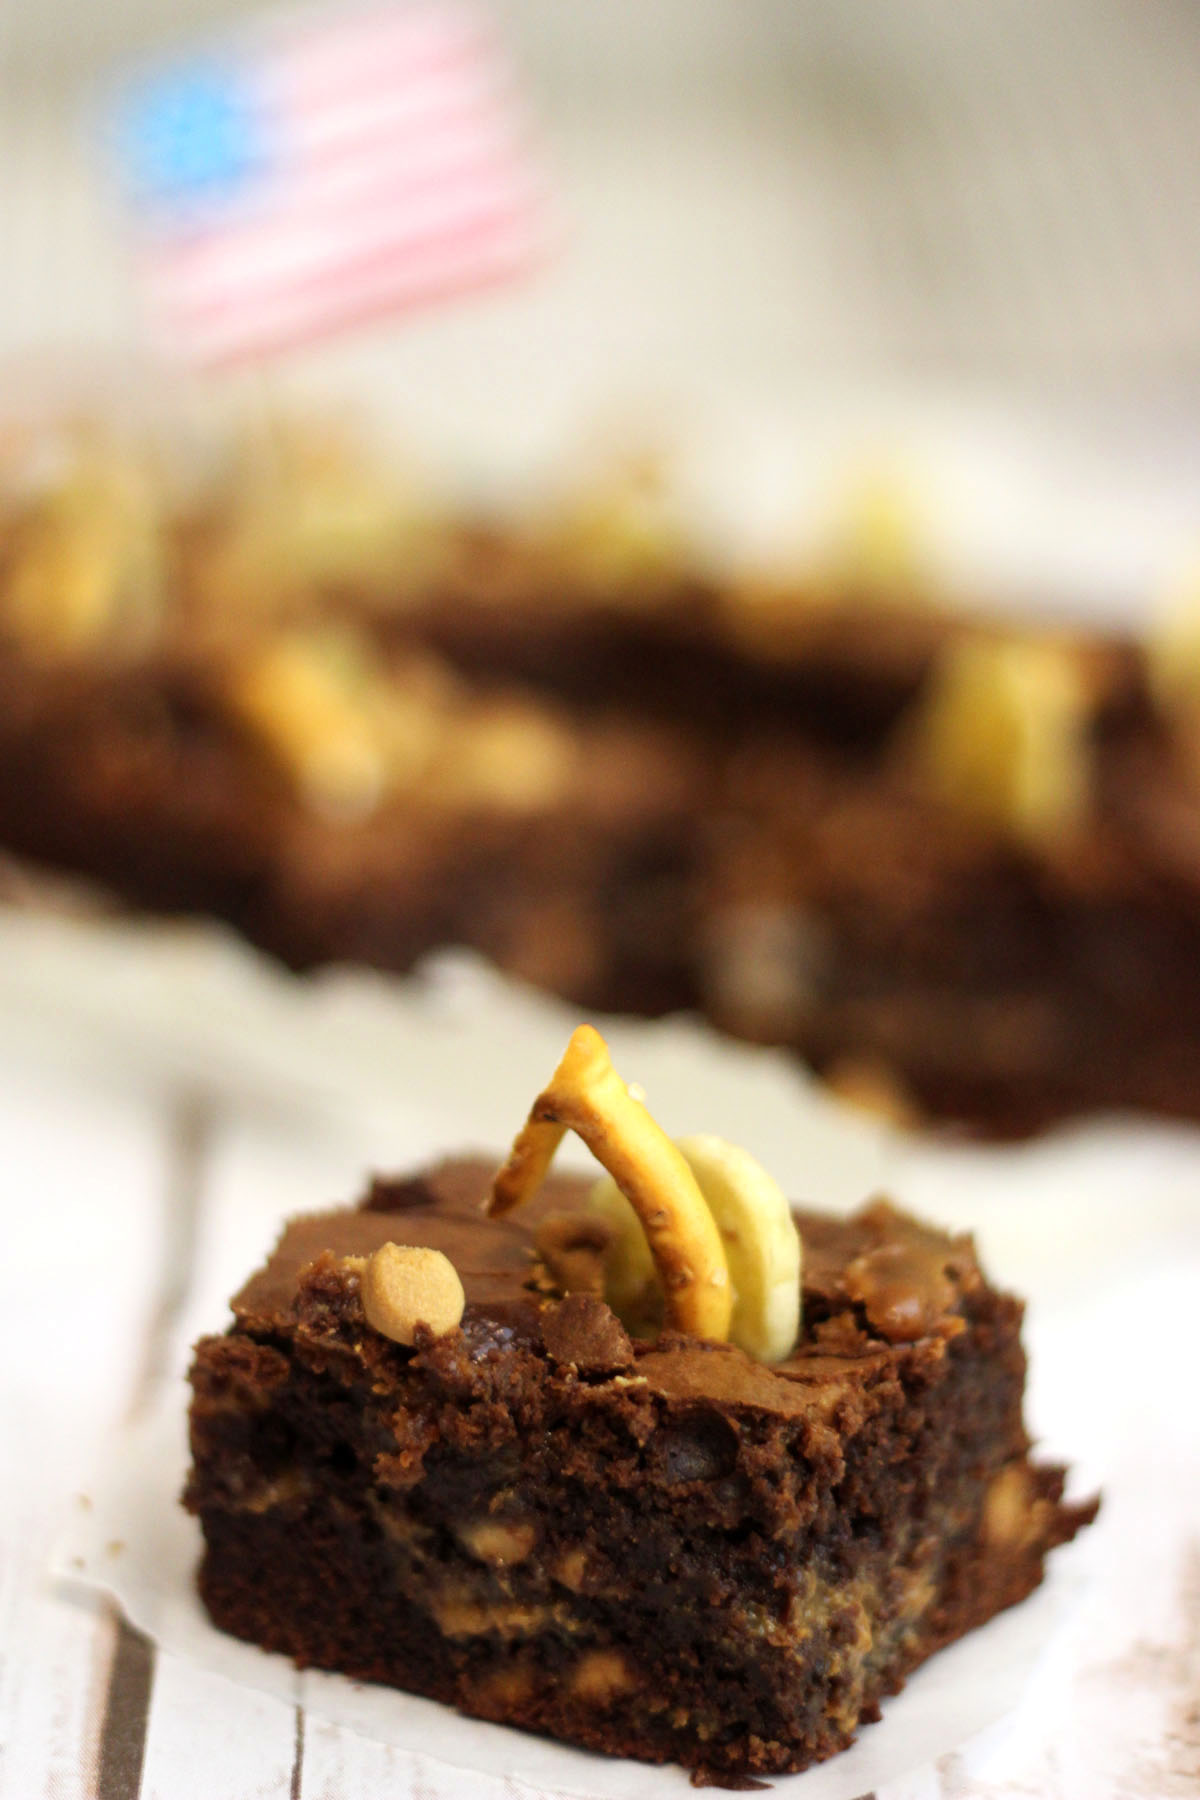 These Fat Elvis Peanut Butter Brownies are truly fir for the King!